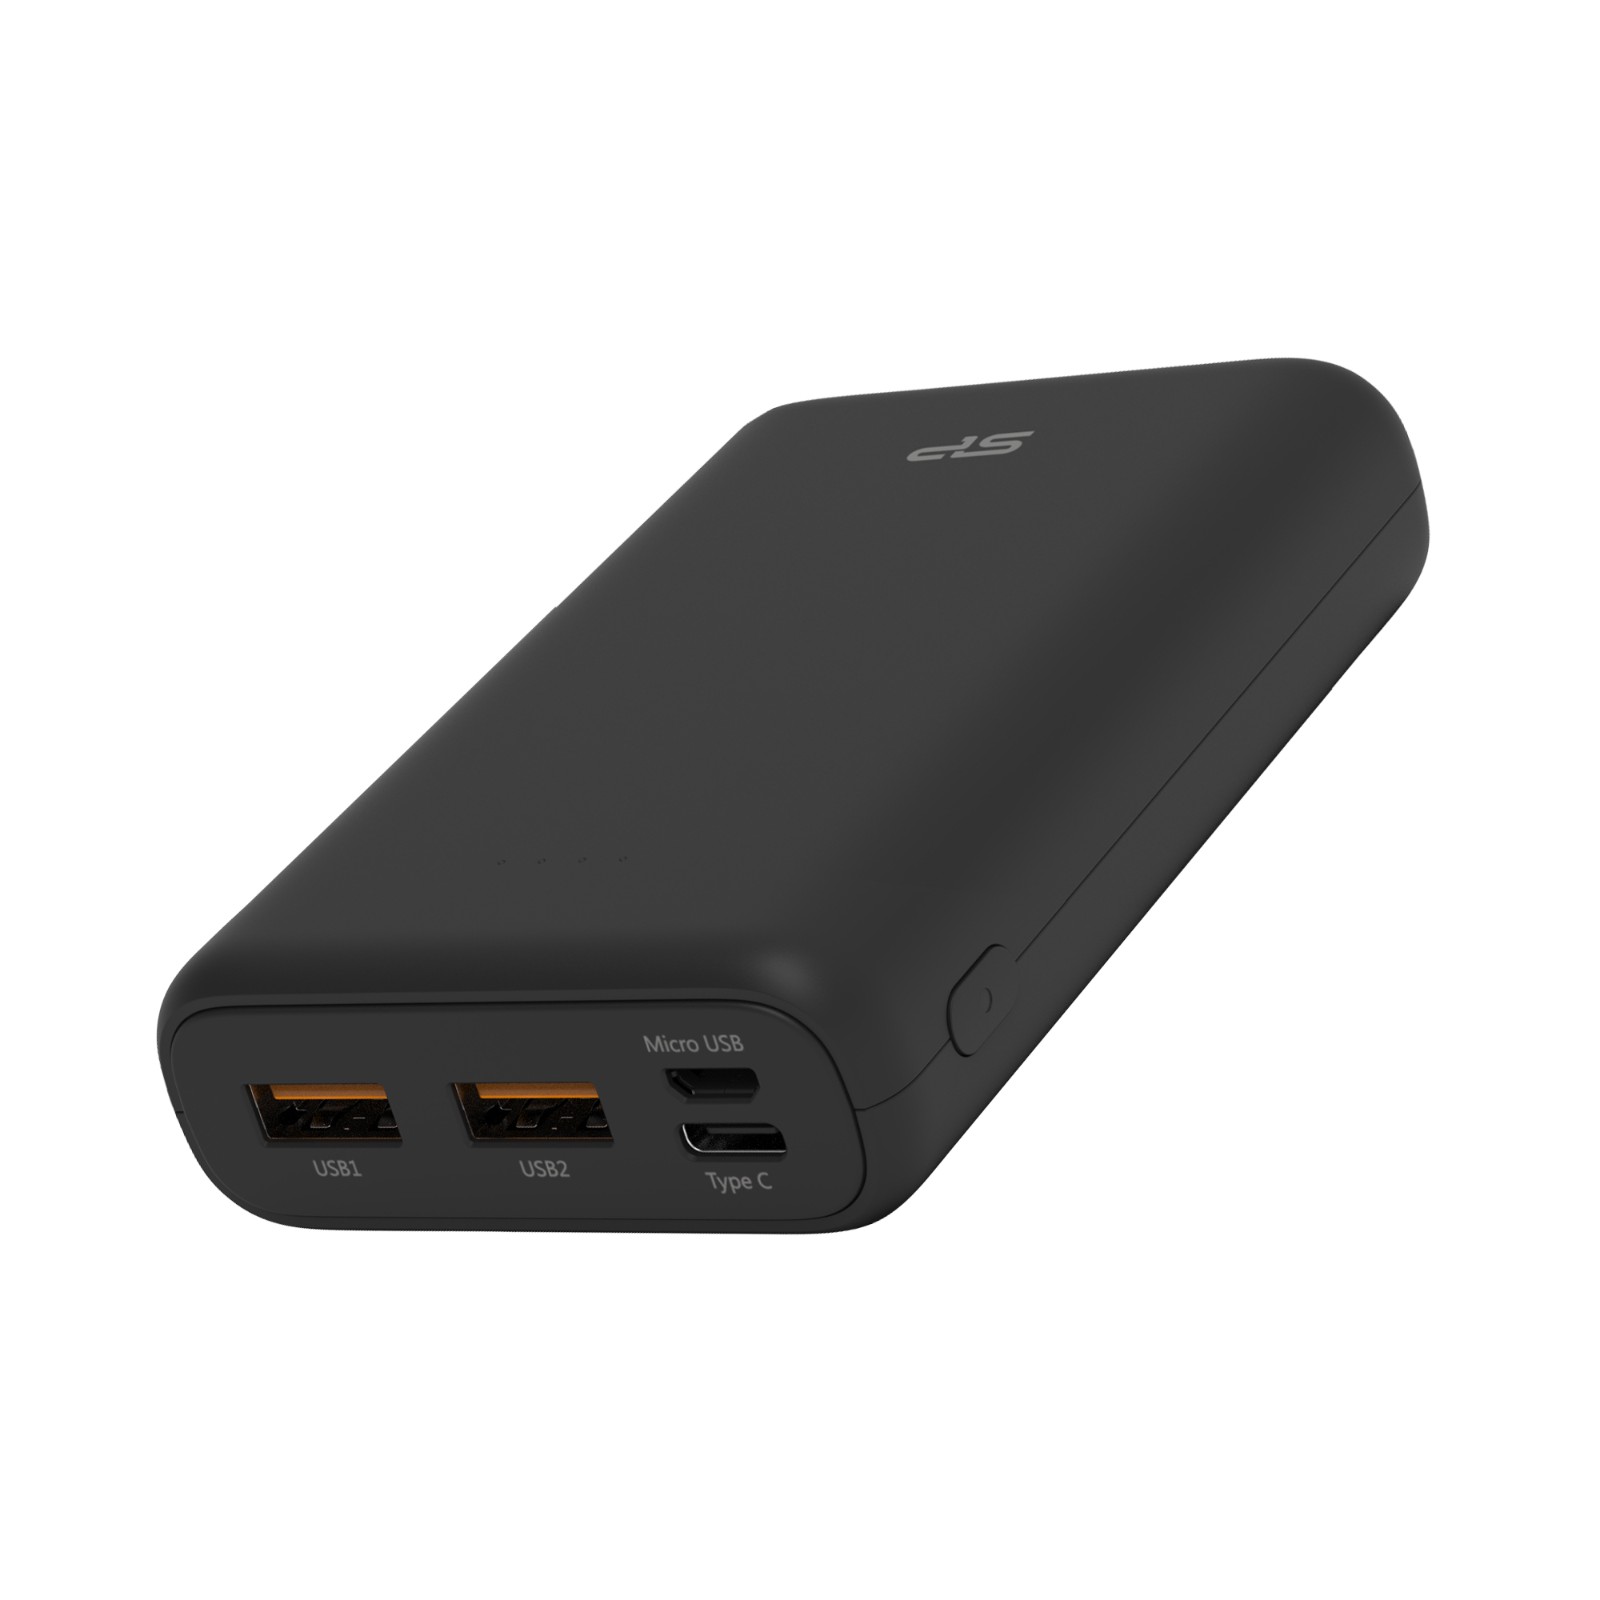 Silicon Power C10QC 10000mAh Power bank, 18W PD & Quick Charge 3.0 USB C Portable Charger, Black